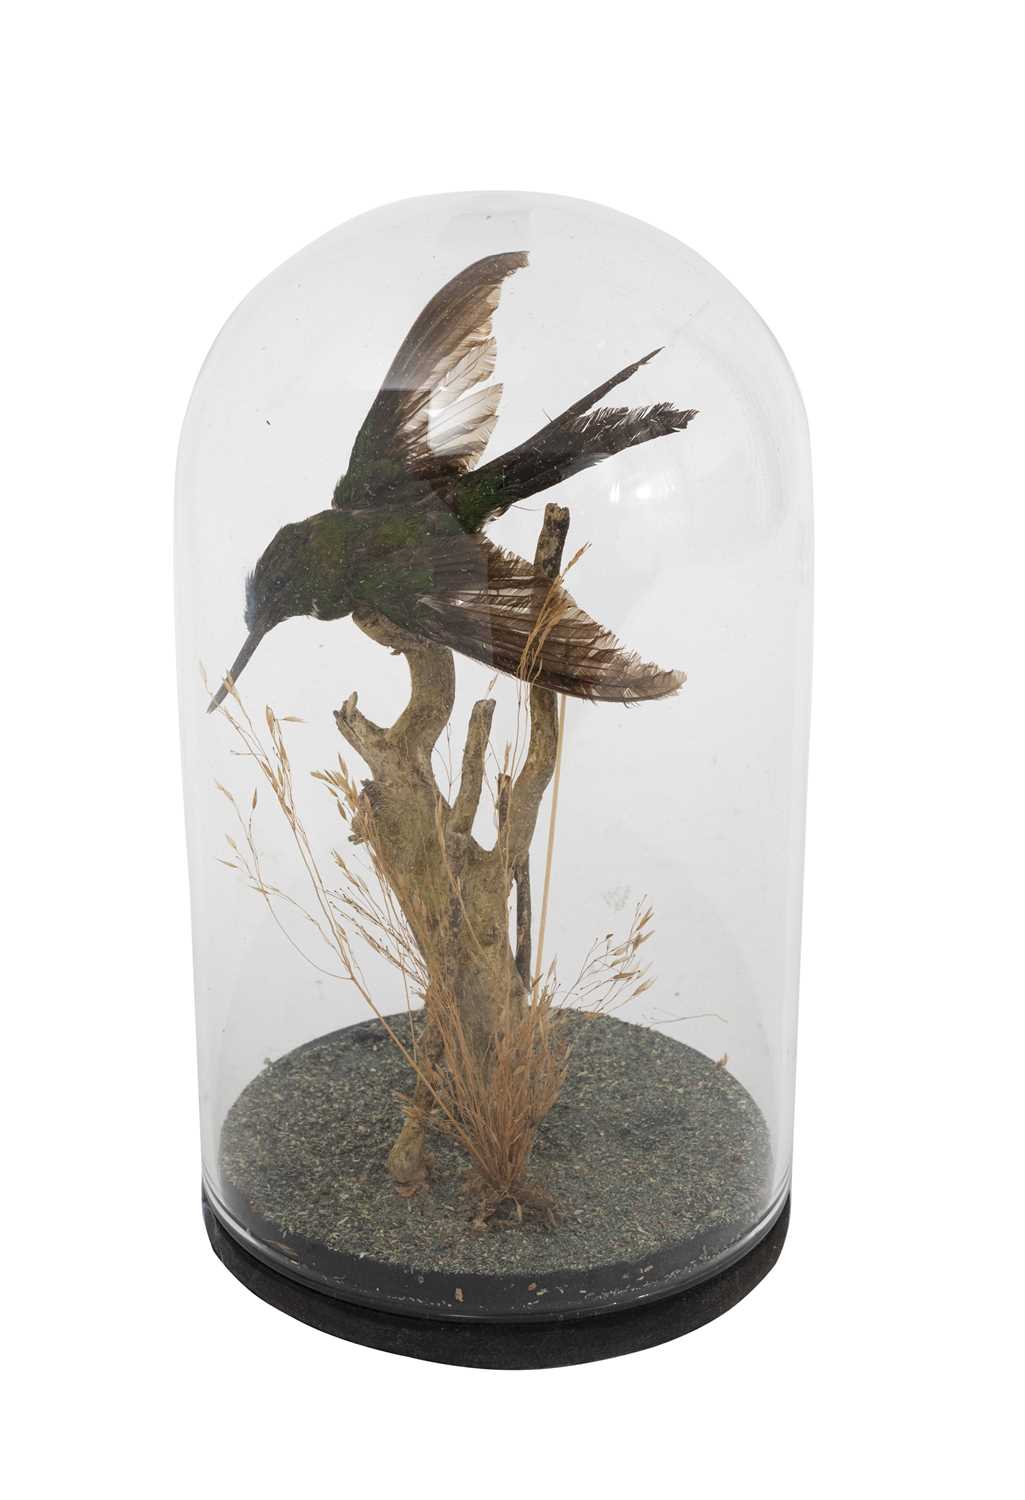 A TAXIDERMY HUMMINGBIRD IN GLASS DOME